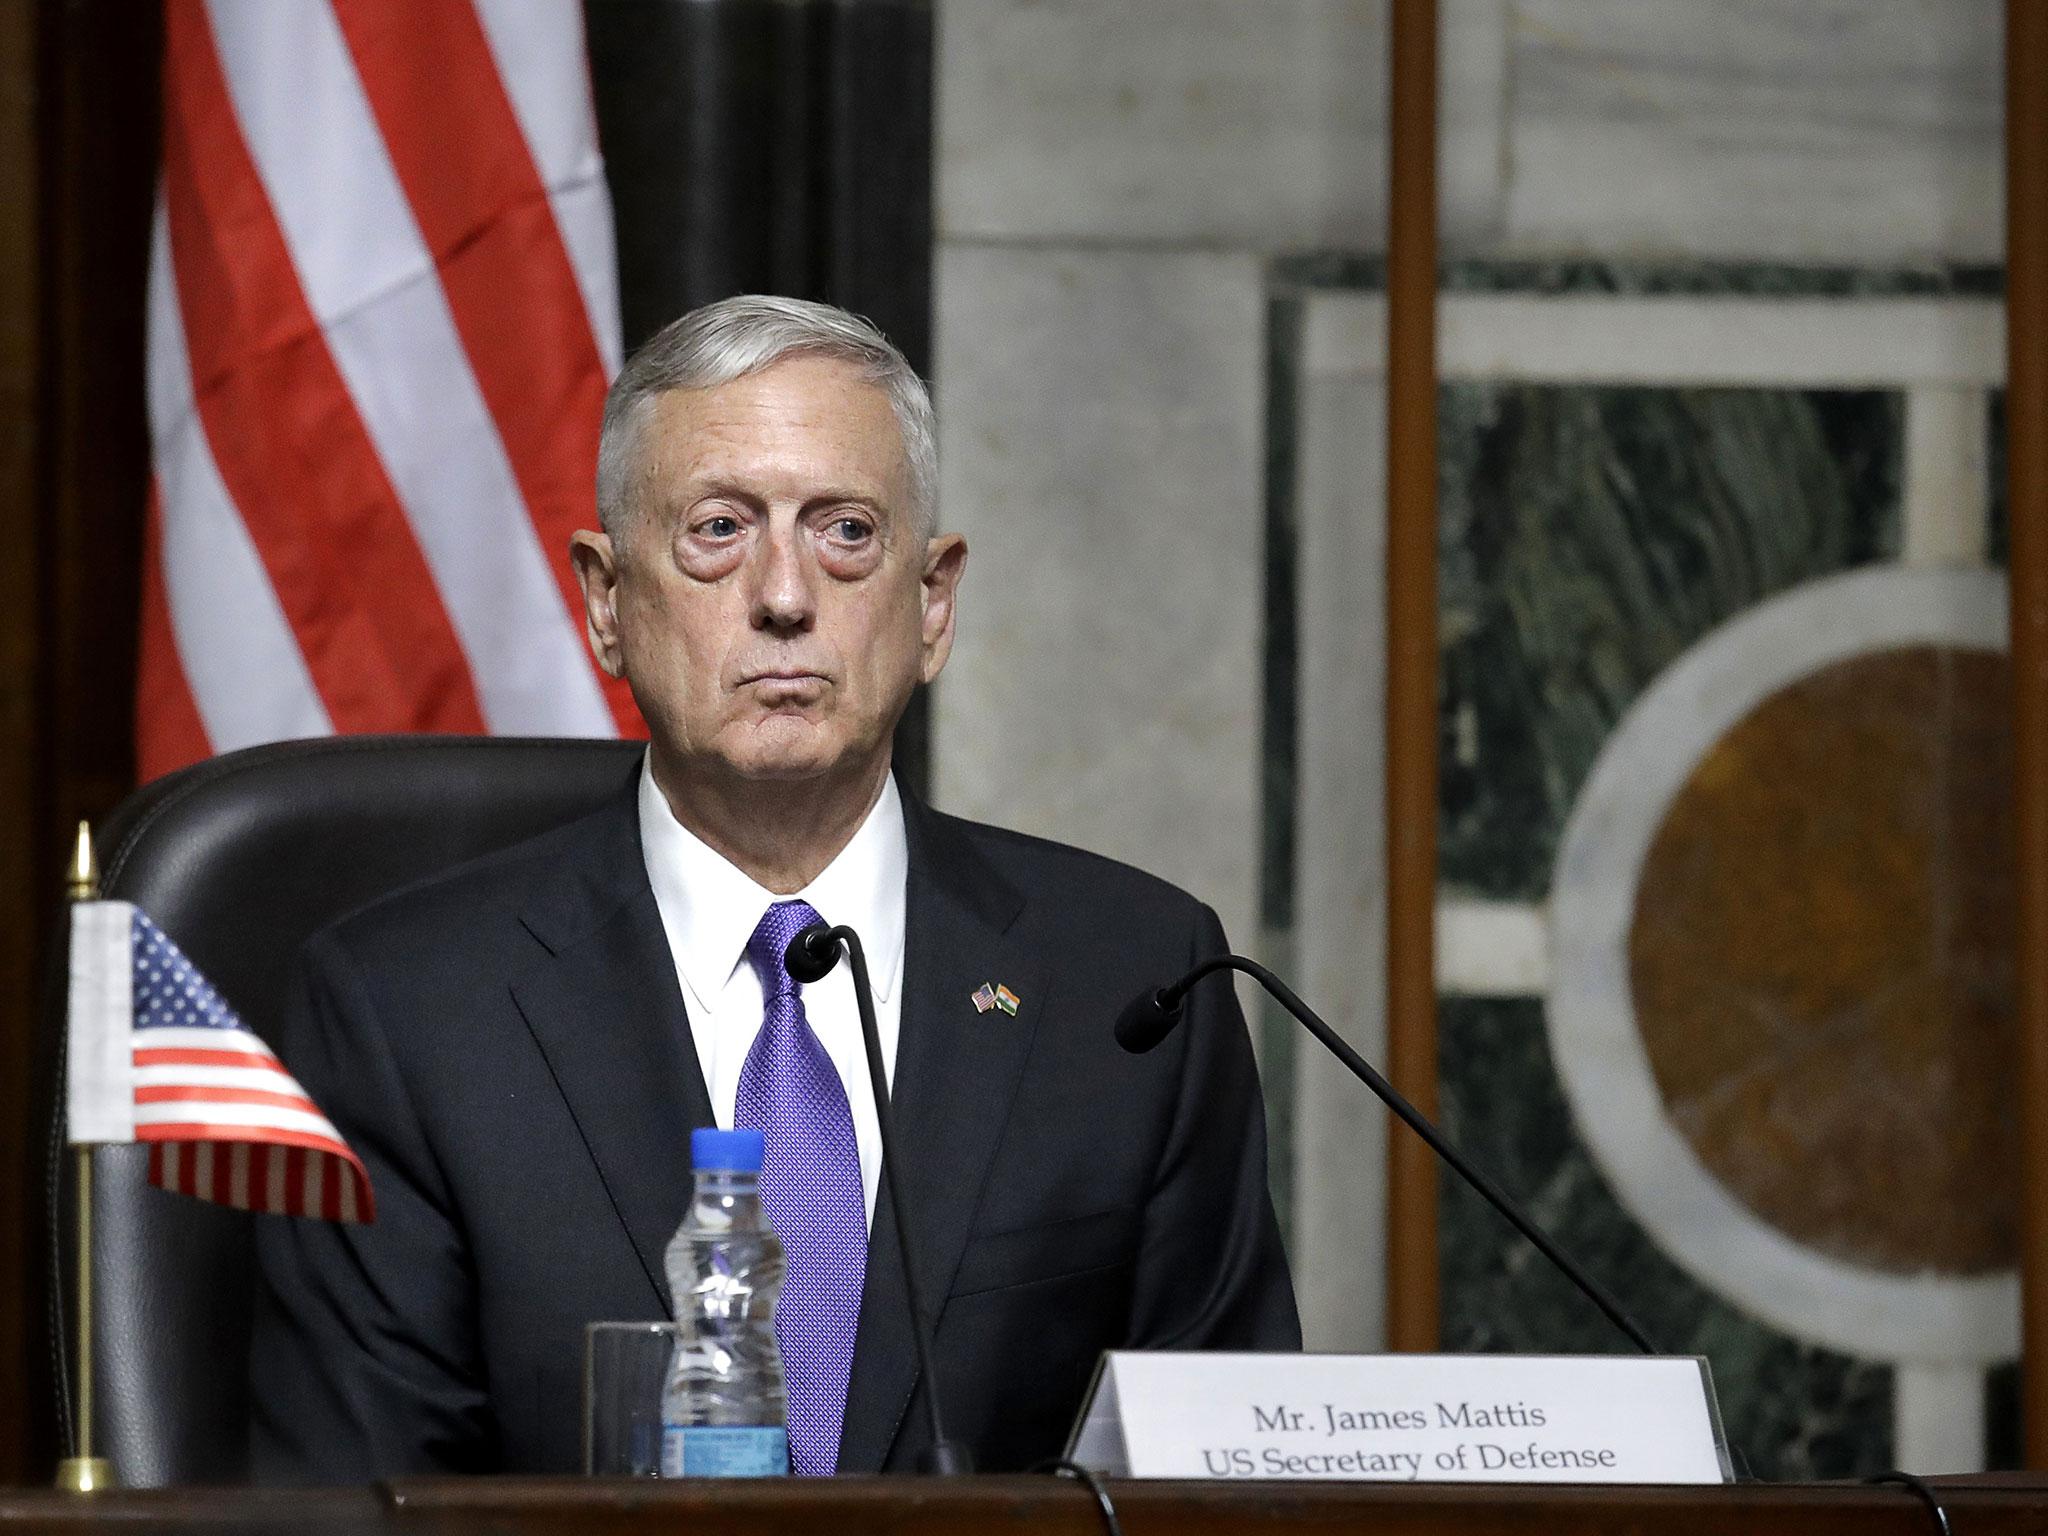 US Defense Secretary Jim Mattis listens to a question during a joint press conference with Indian Defense Minister Nirmala Sitharaman